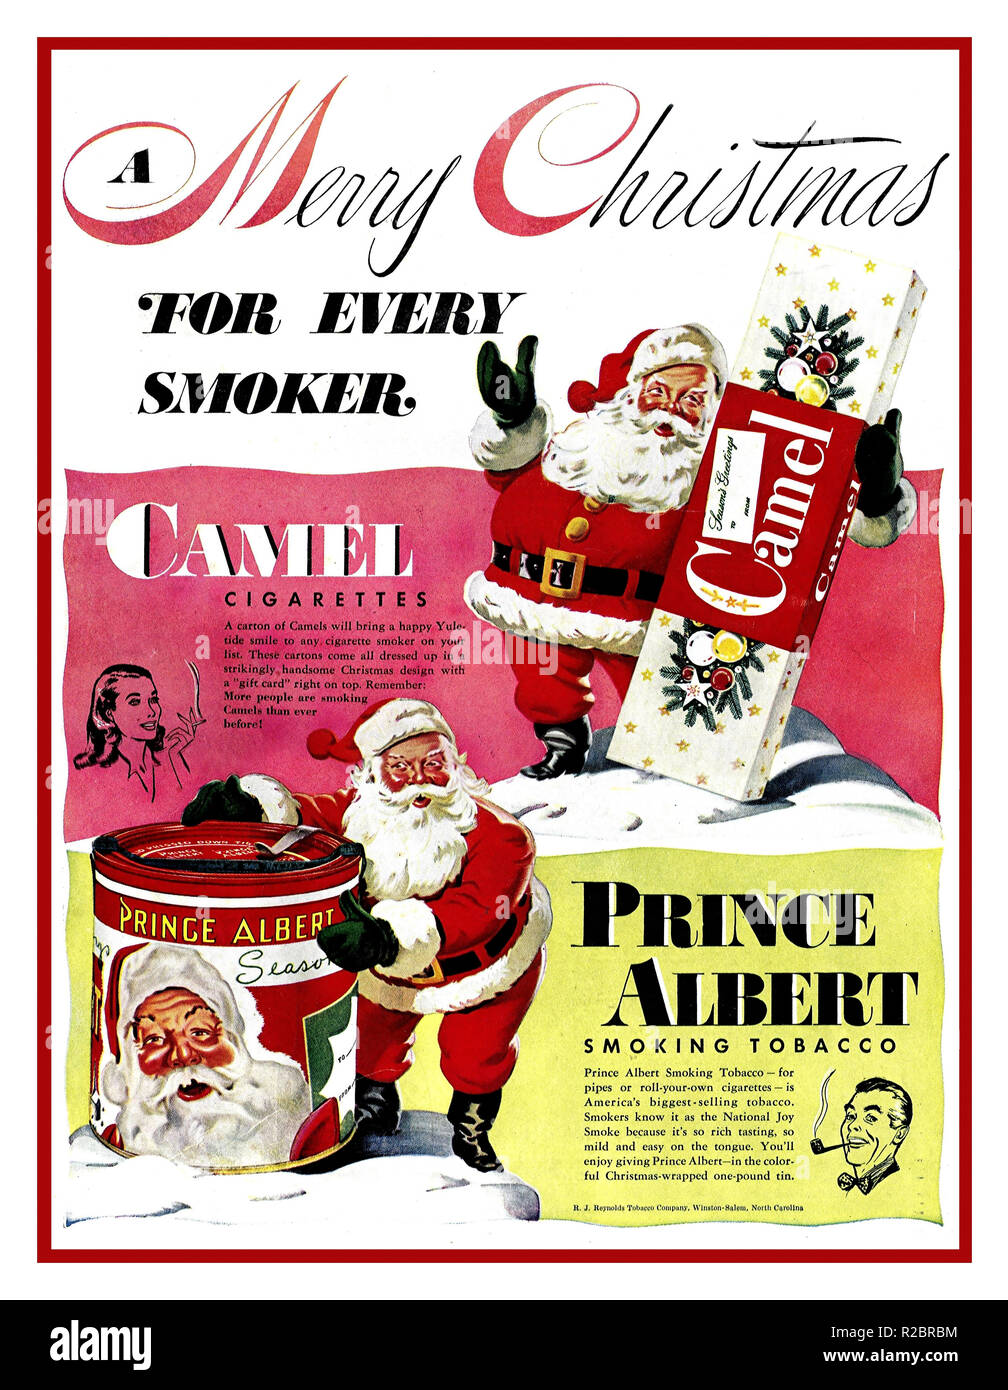 1947 Vintage Magazine Advertisement for CAMEL Cigarettes and PRINCE ALBERT smoking Tobacco Tins. 'A Merry Christmas for every smoker' Stock Photo